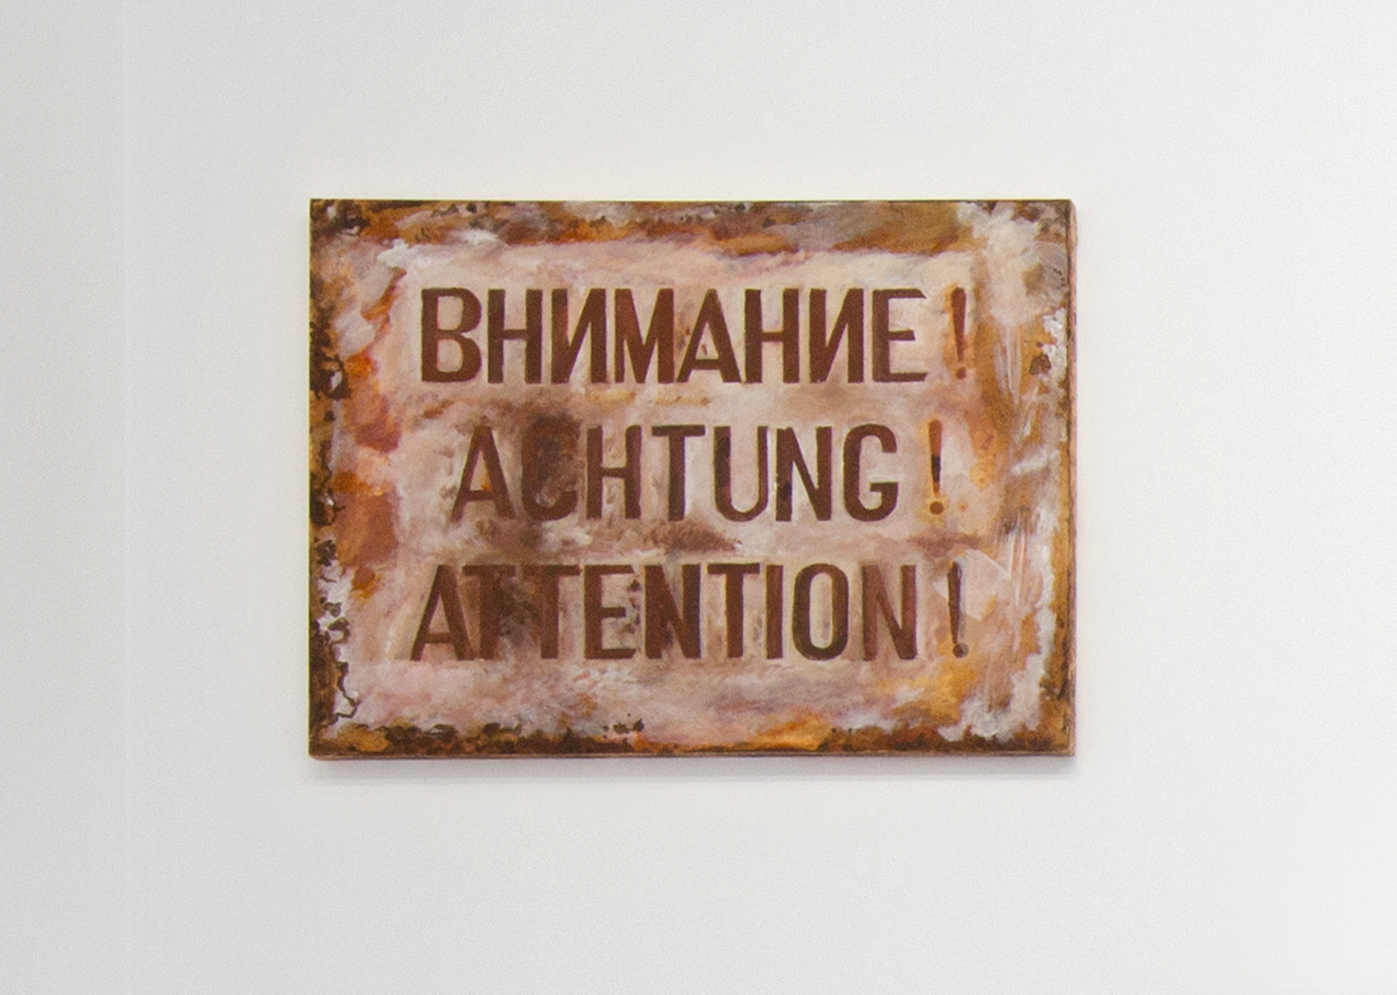 Achtung!, 2019